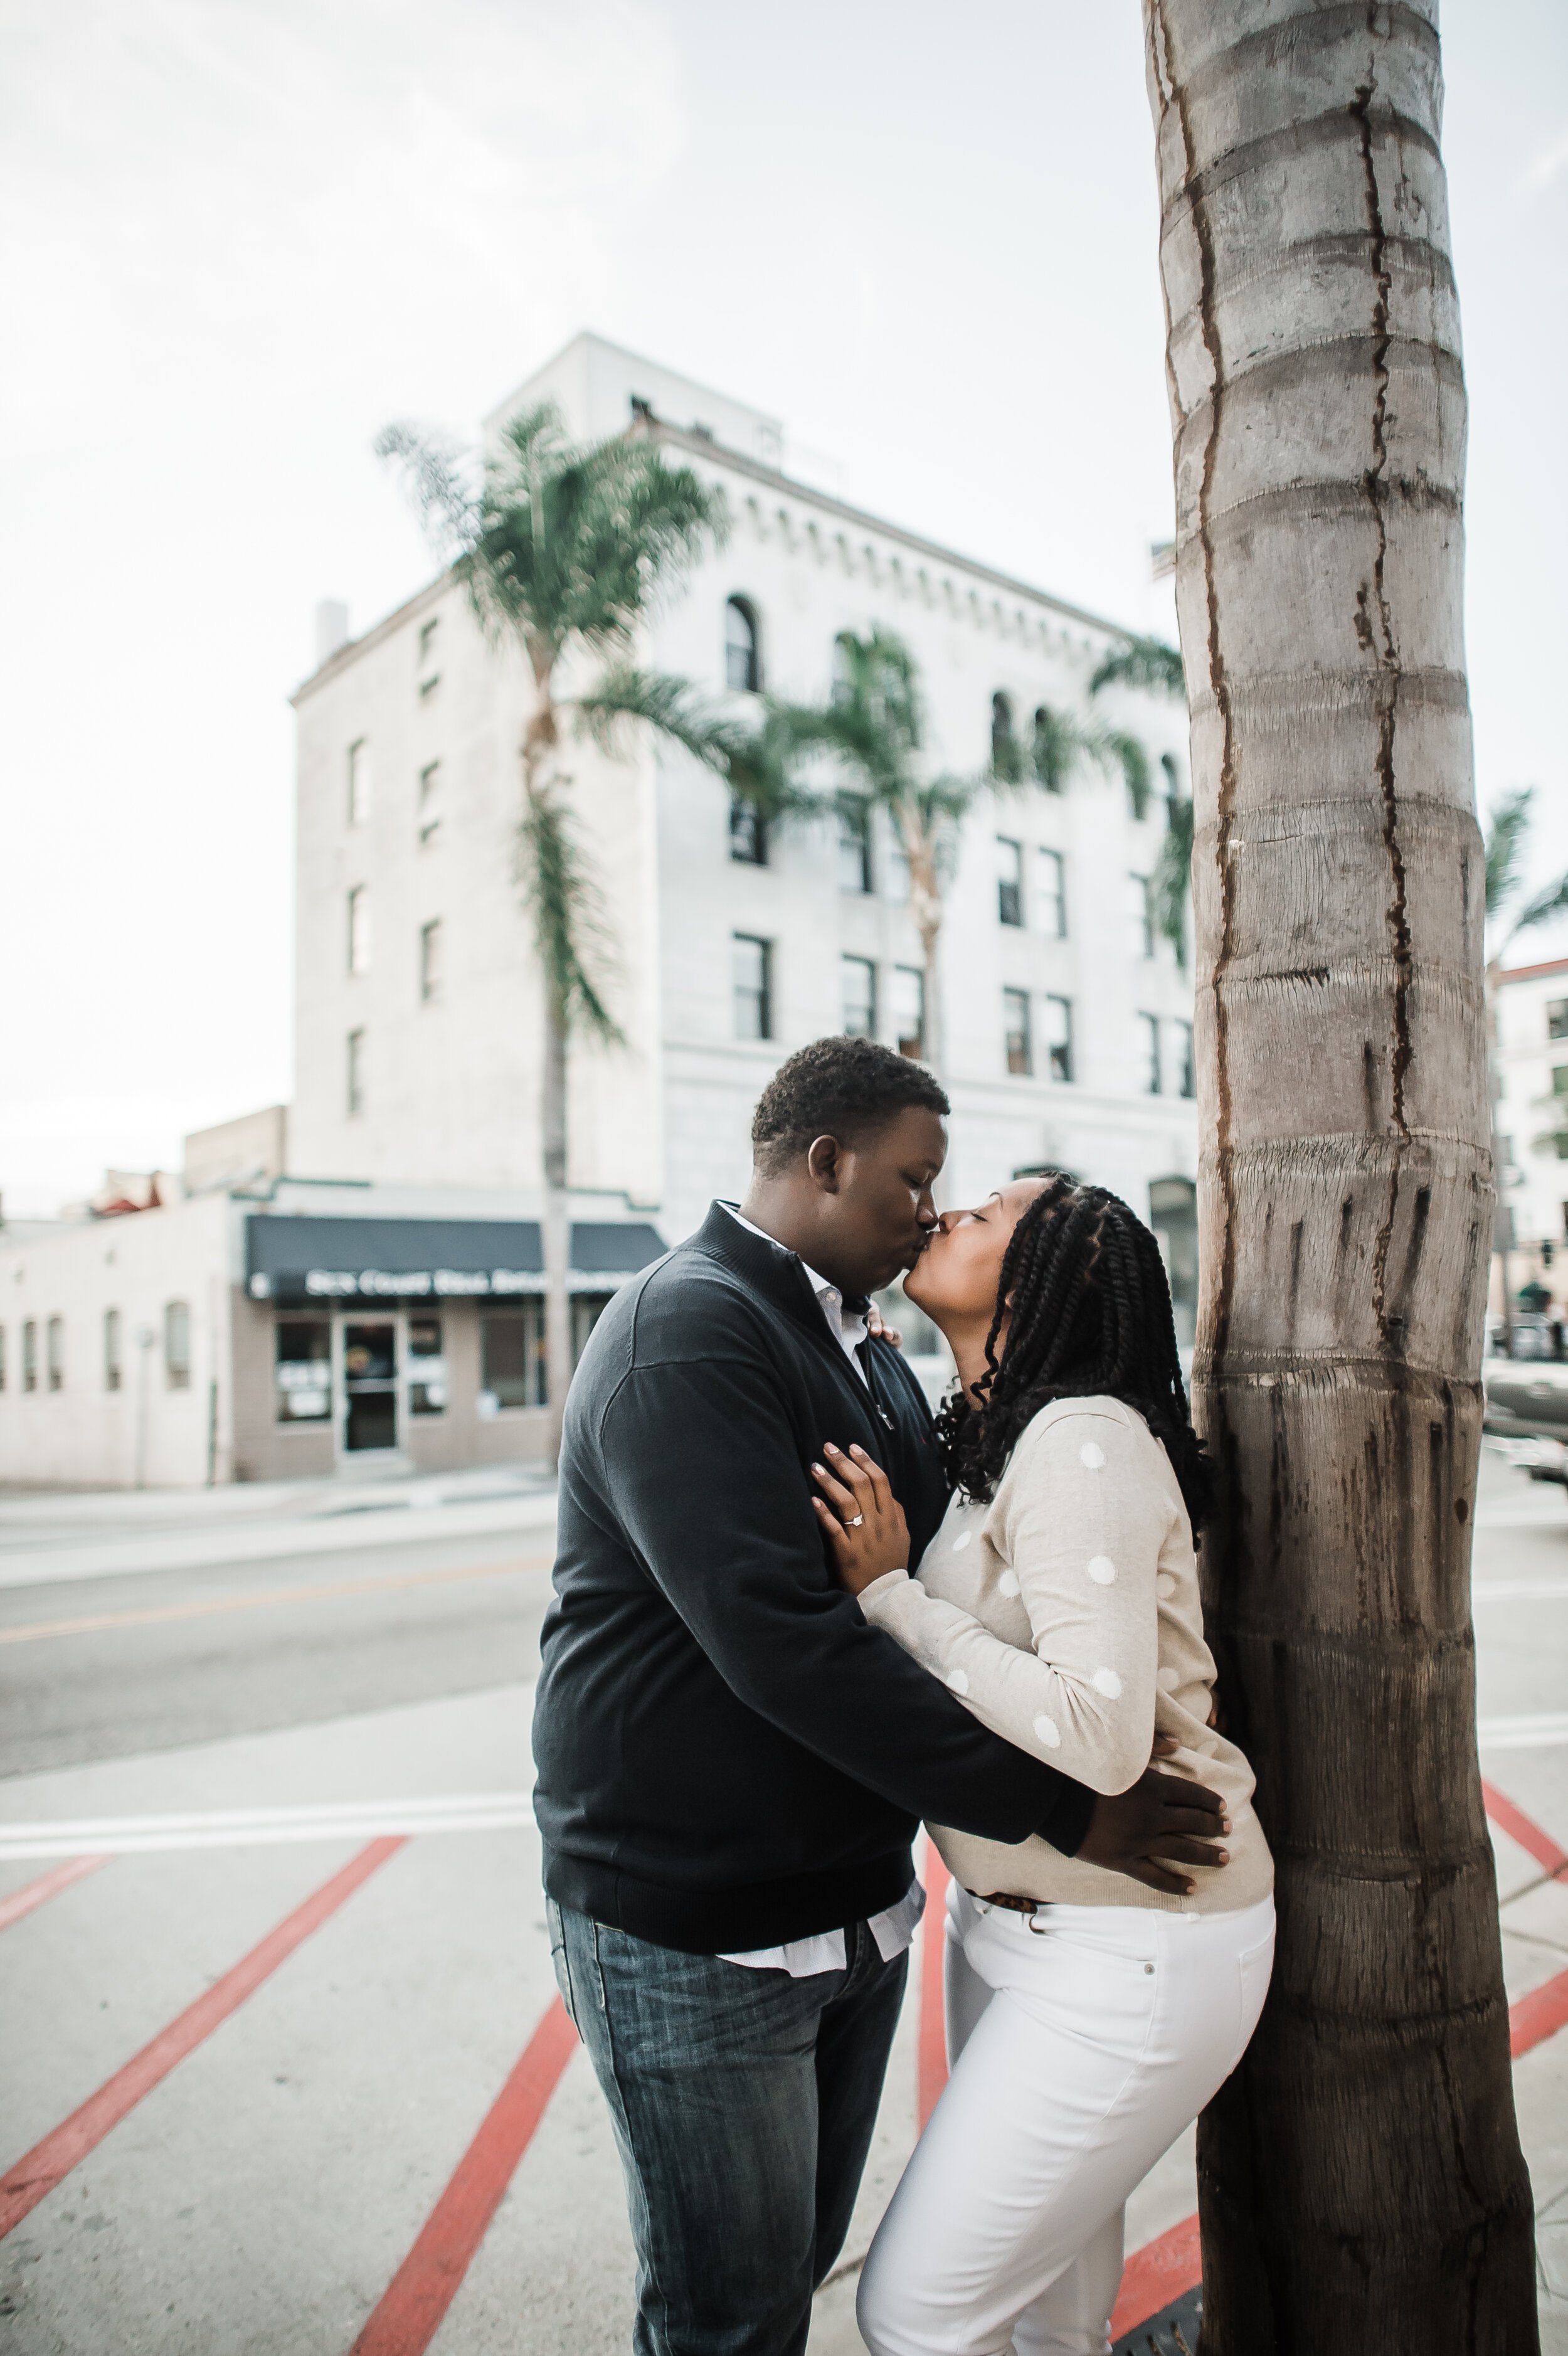 www.santabarbarawedding.com | Michelle Ramirez Photography | Couple Kisses by A Palm Tree in Downtown Ventura During Engagement Session